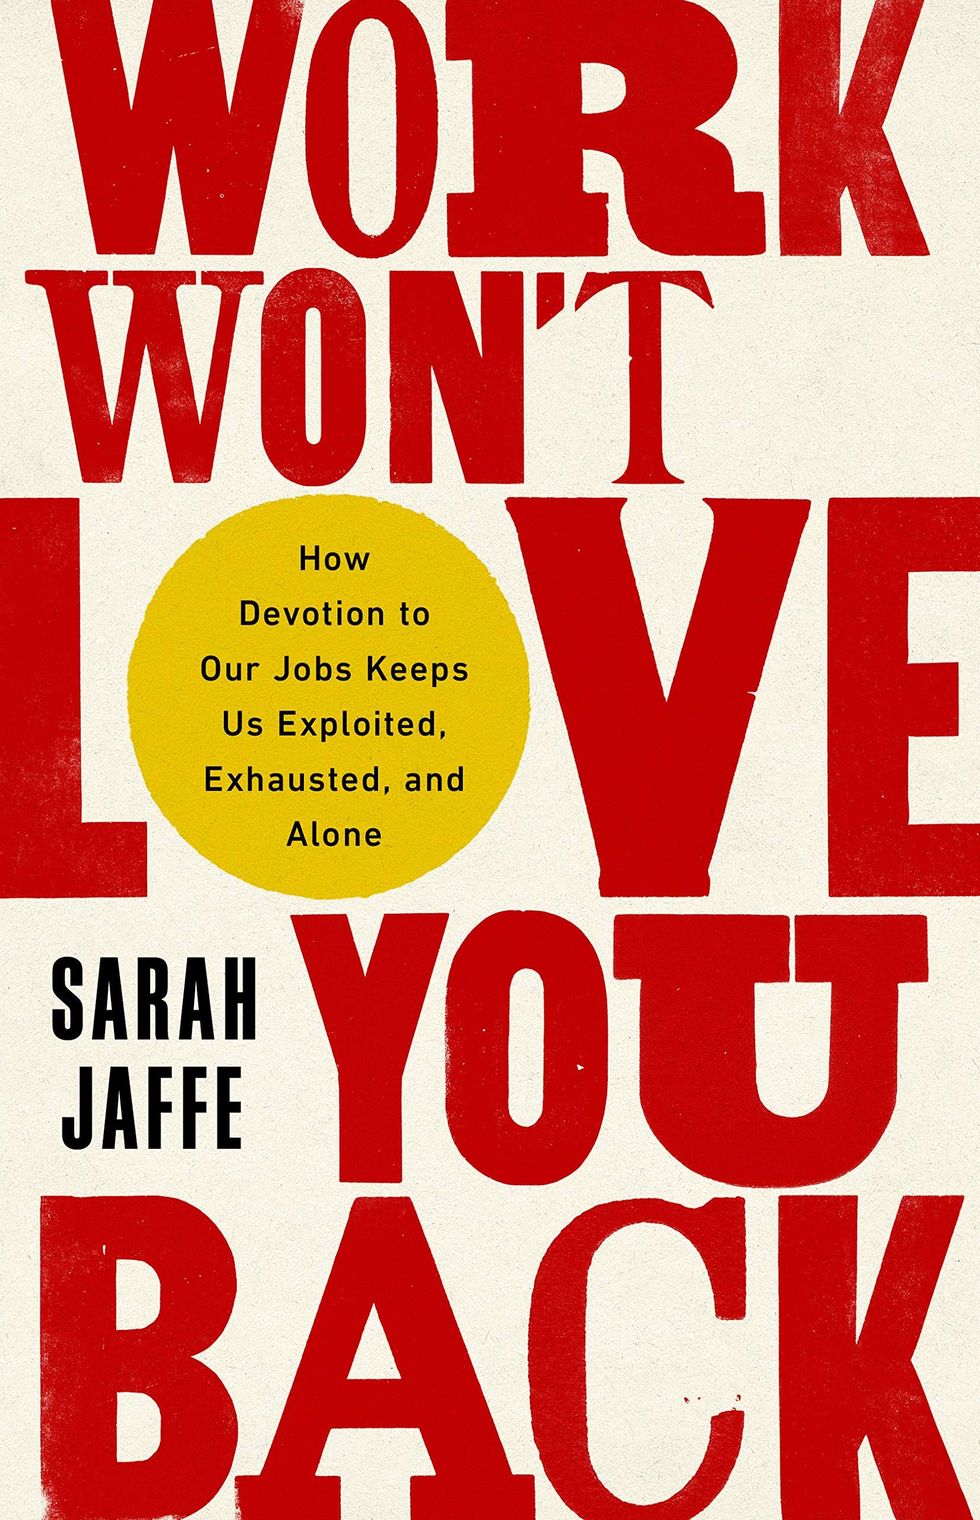 Work Won’t Love You Back: How Devotion to Our Jobs Keeps Us Exploited, Exhausted, and Alone by Sarah Jaffe